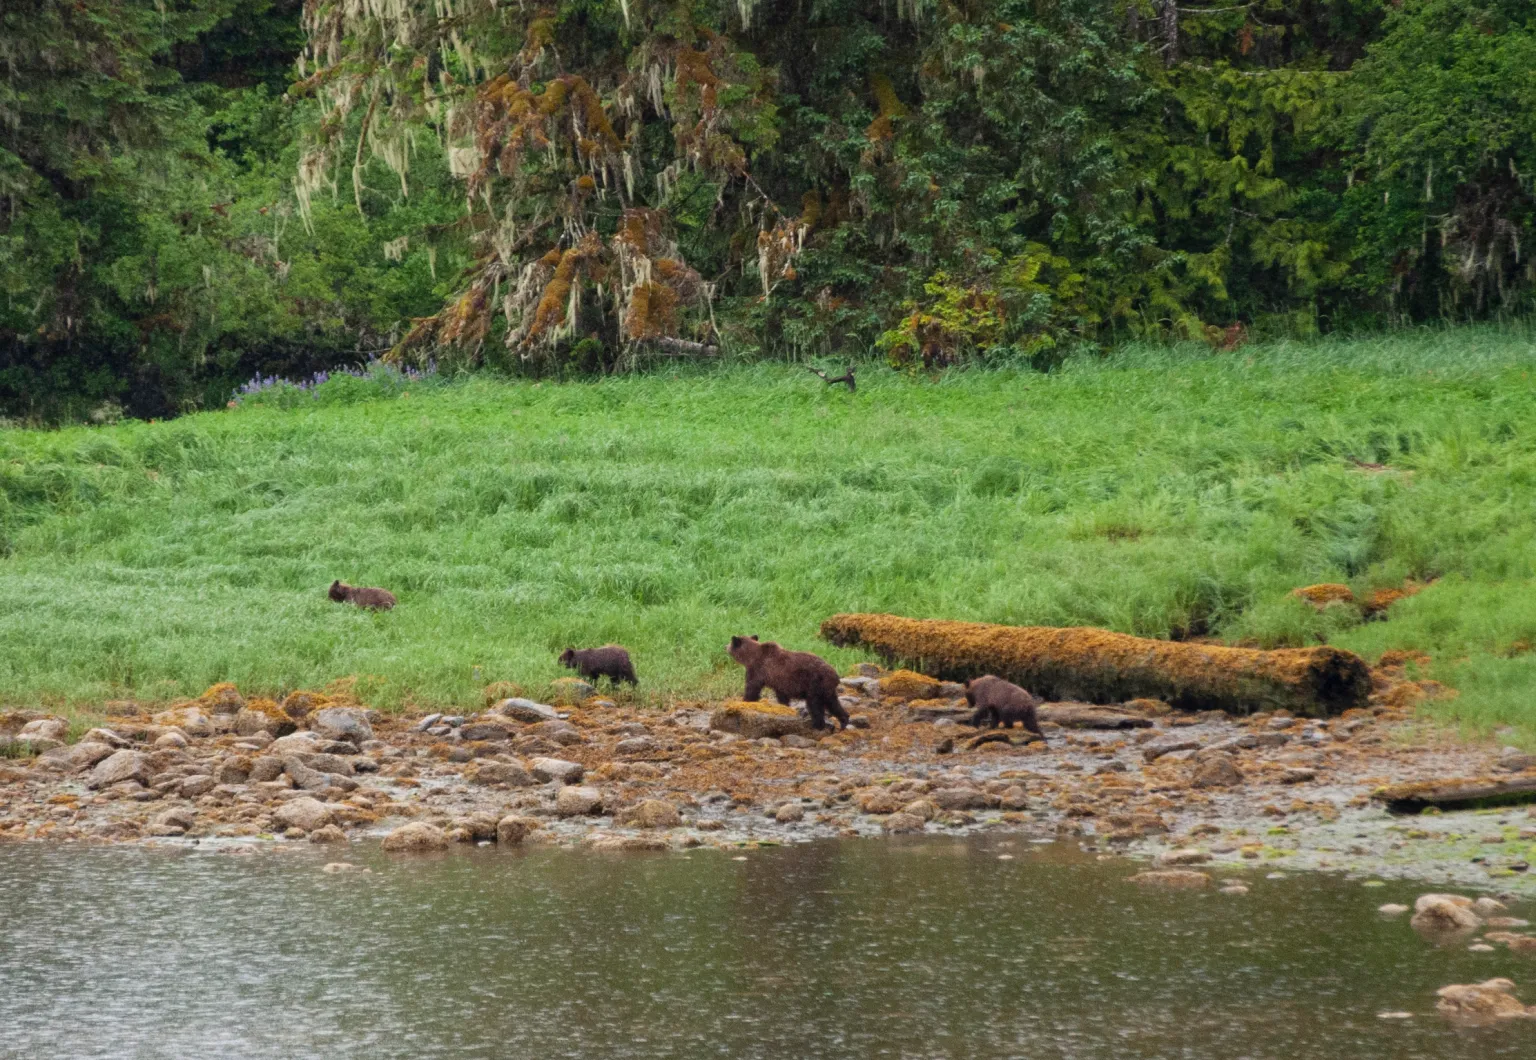 Grizzly bear mom and cubs on shore at Khutzeymateen Provincial Park